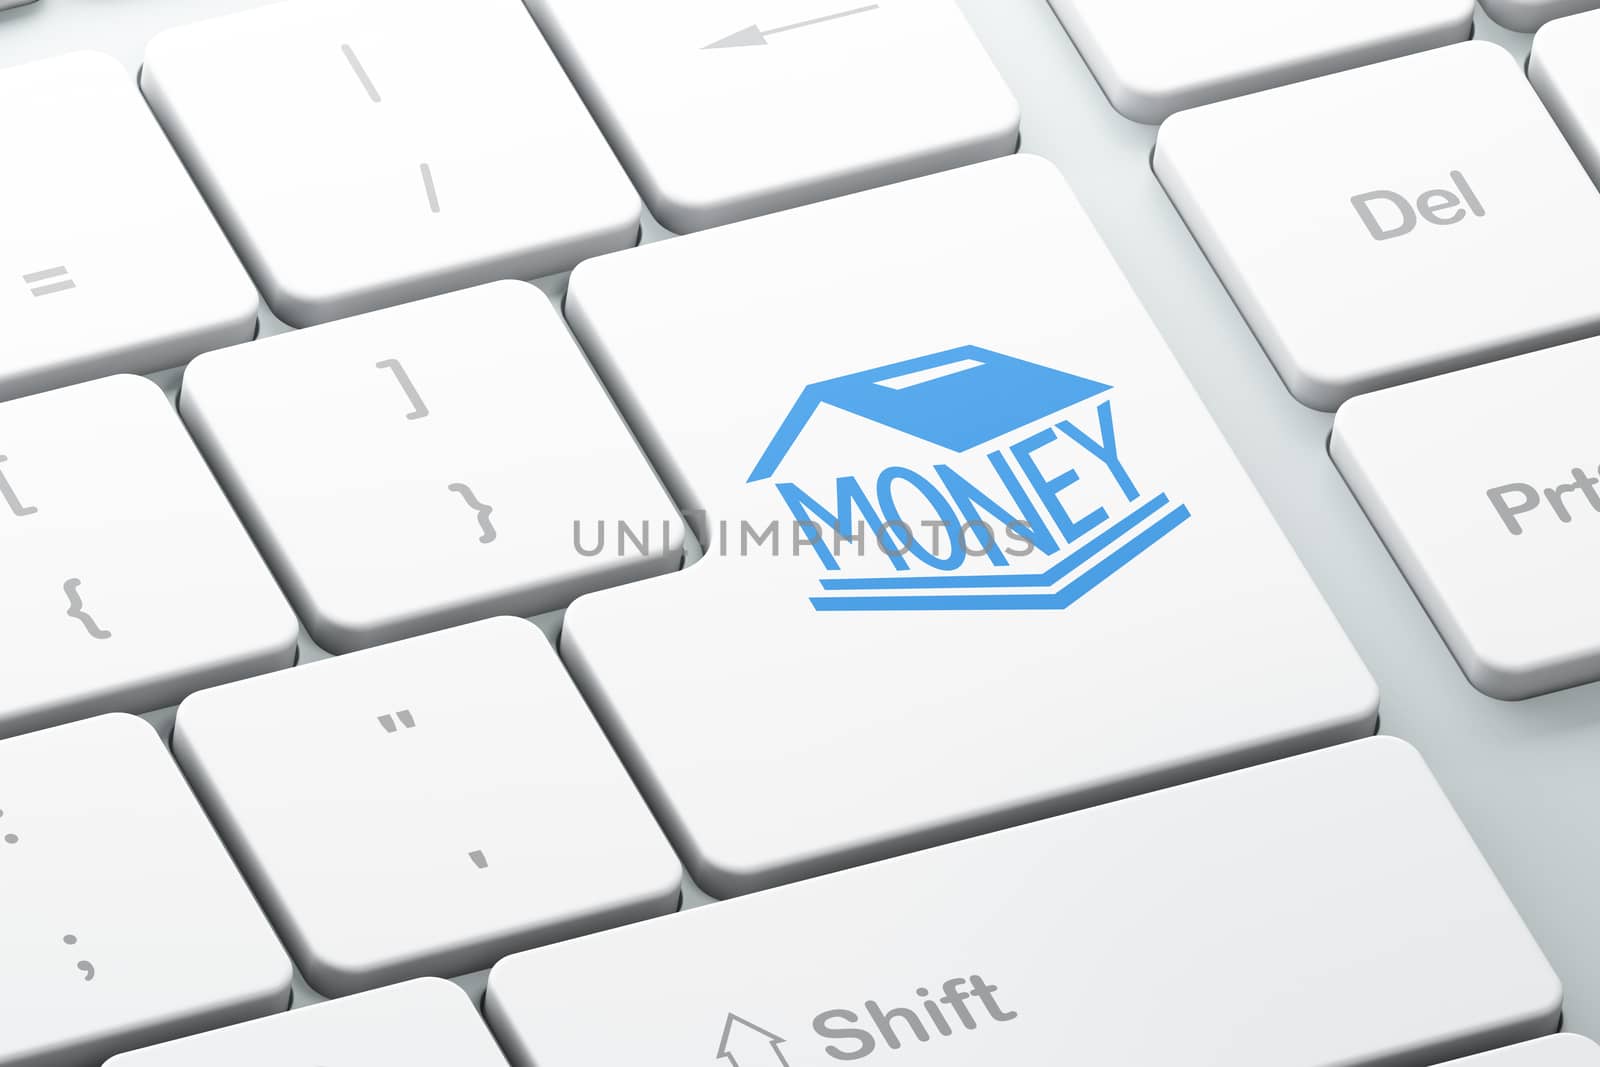 Money concept: Enter button with Money Box on computer keyboard background, 3d render